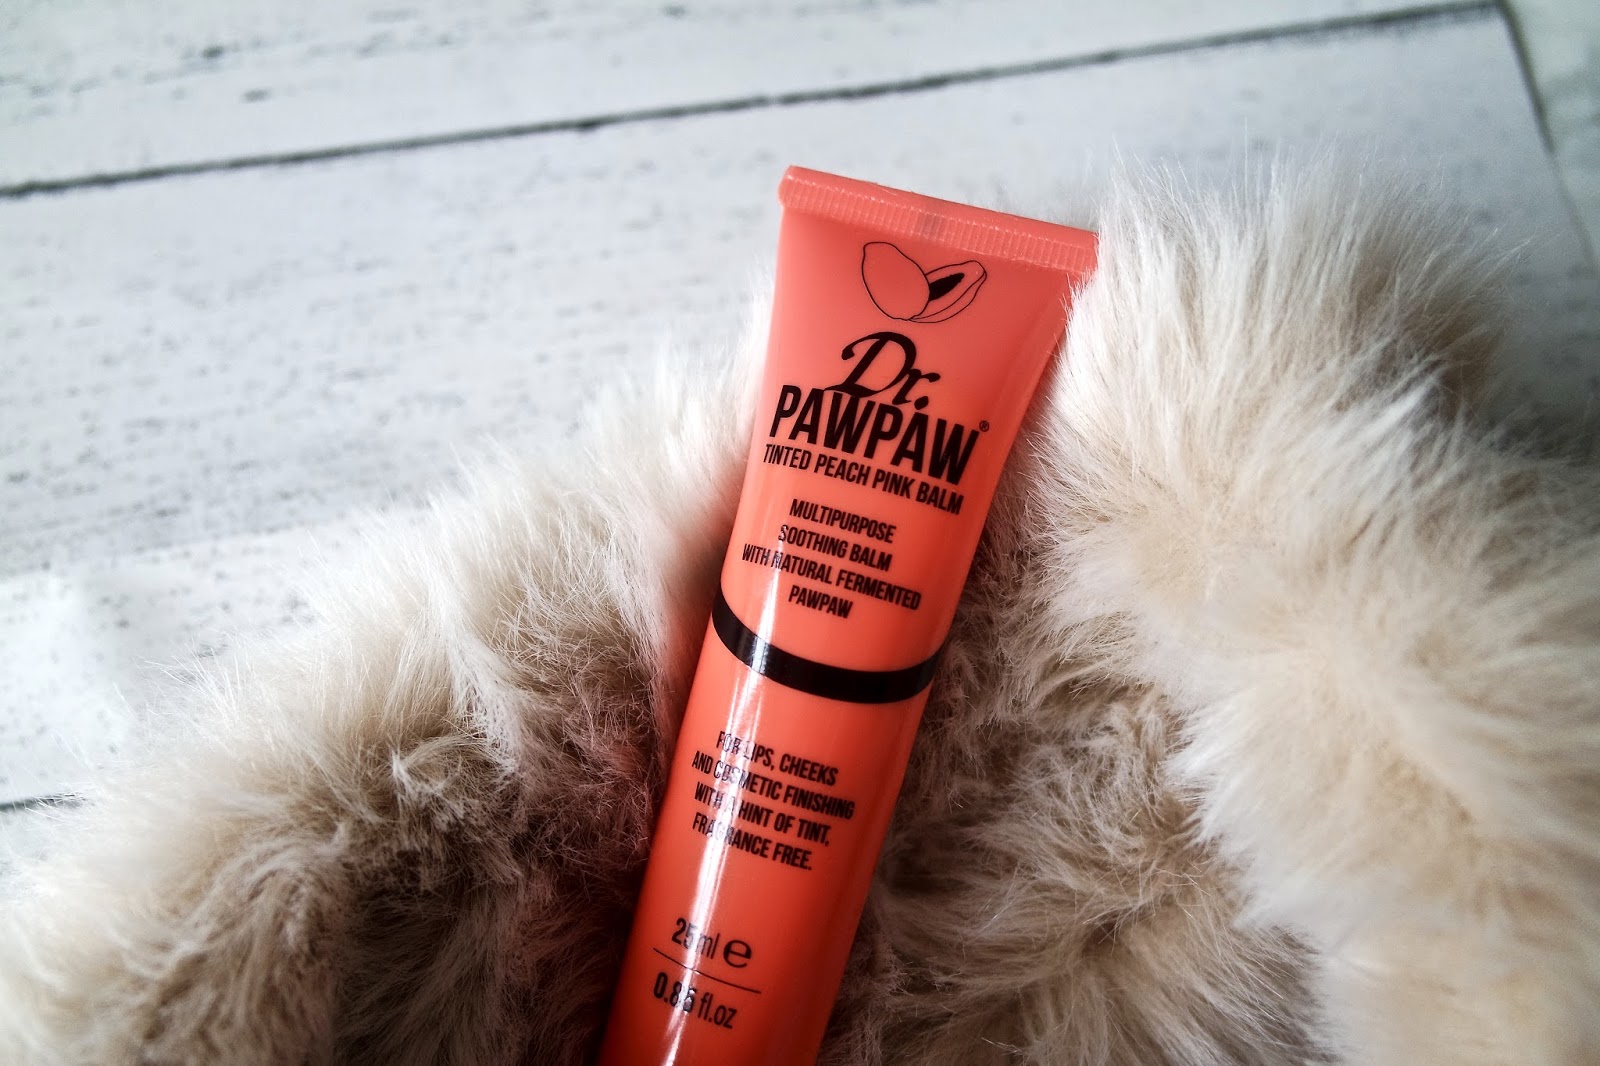 Dr. PawPaw Peachy Pink Balm Review